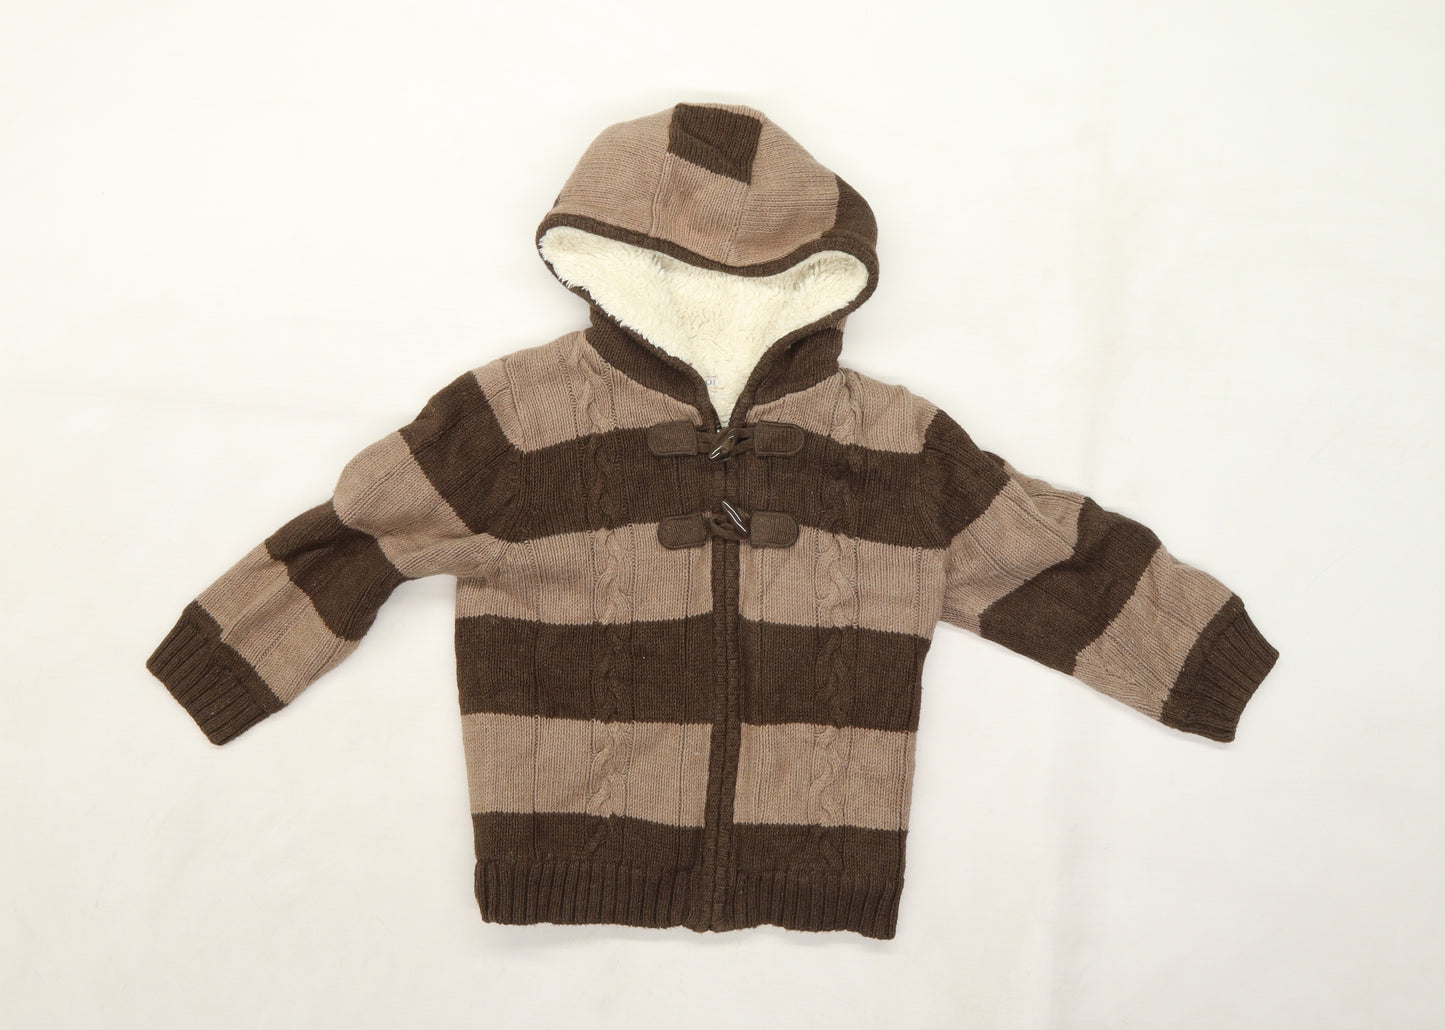 Marks and Spencer Boys Brown Striped Knit Cardigan Jumper Size 4-5 Years